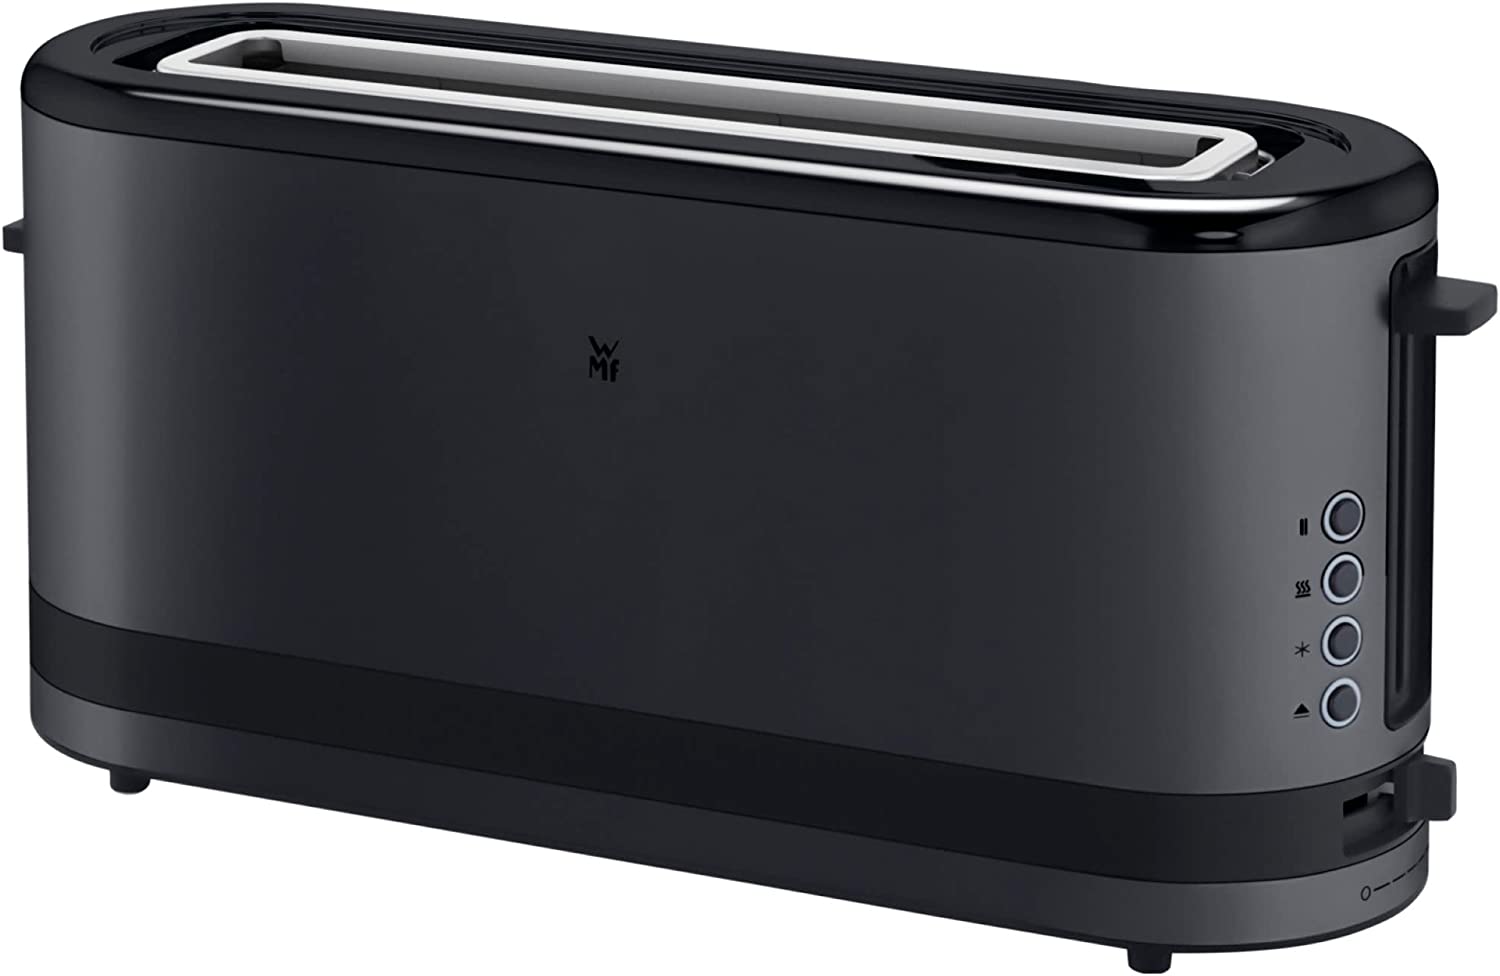 WMF KÜCHENminis Long Slot Toaster, Deep Black Design, 2-Slice Toaster, Compact, for 2 XXL Toasts or an Extra Long Bread Slice, High-Quality Stainless Steel Housing, 7 Browning Levels